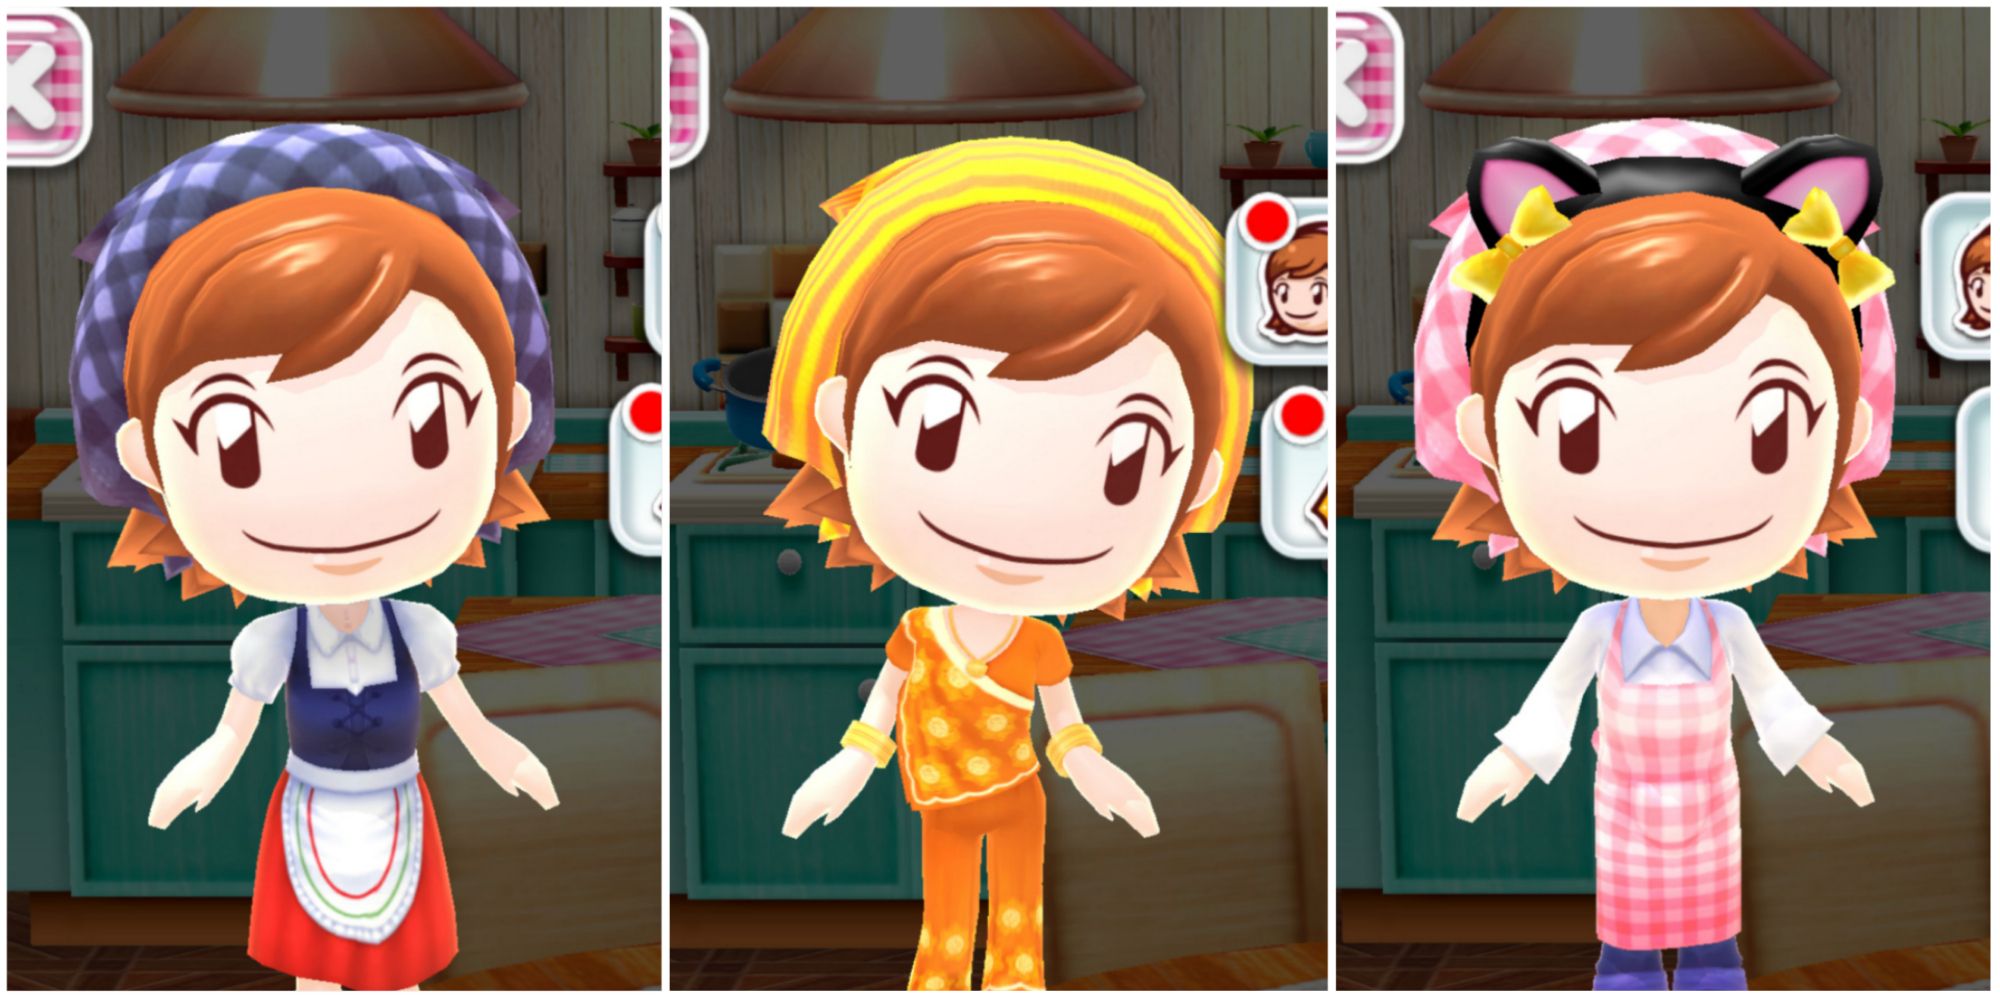 A split image of Cooking Mama wearing a peasant dress, wearing a saree pant suit, and wearing a pink apron and black cat ears